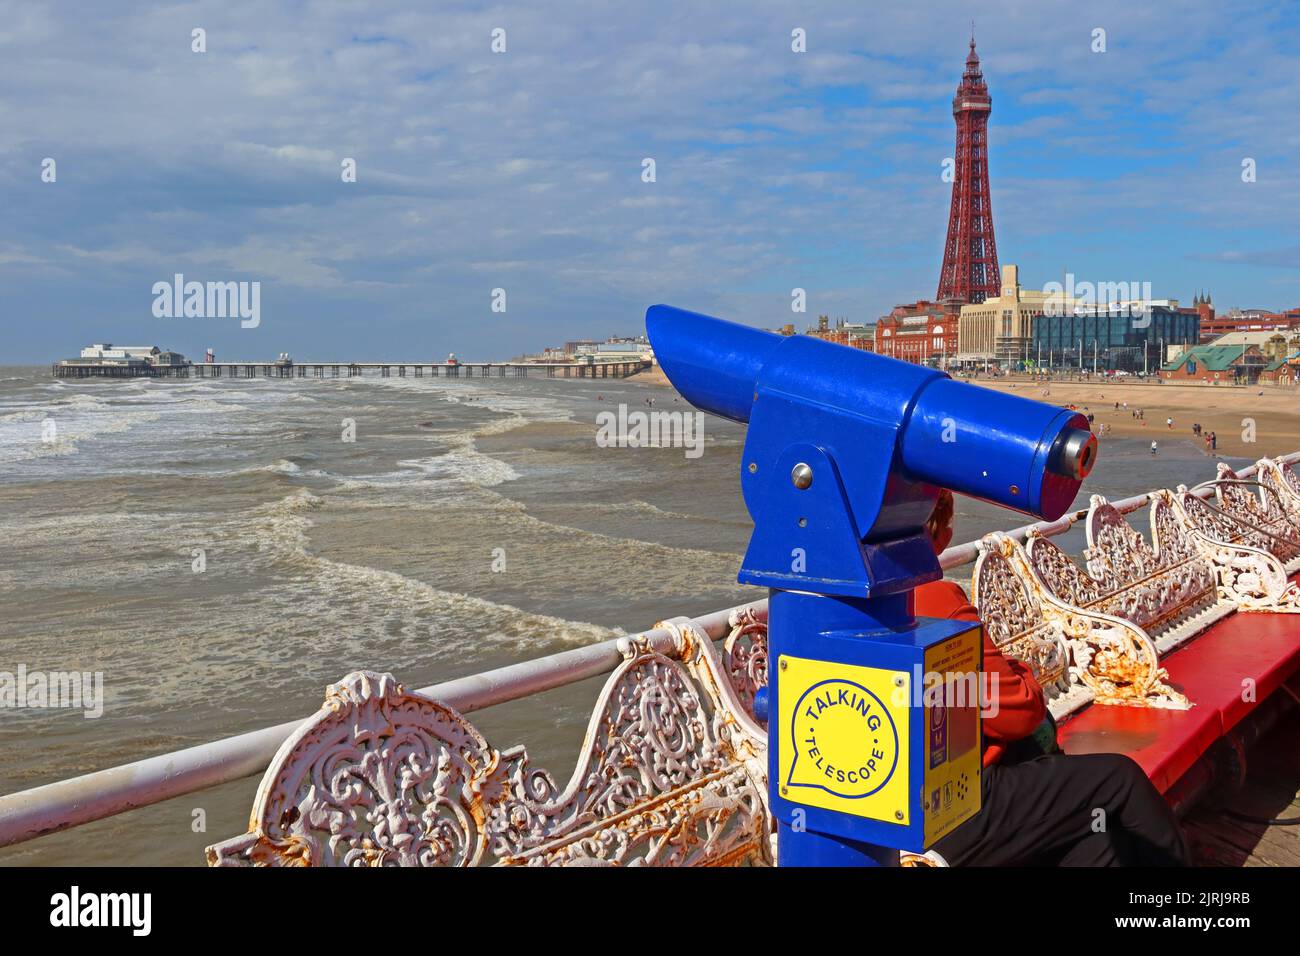 Blackpool Tower and promenade, vue depuis Central Piers Victorian 1868 BoardWalk & Talking Telescope, Blackpool, Lancashire, Angleterre, Royaume-Uni, FY1 5BB Banque D'Images